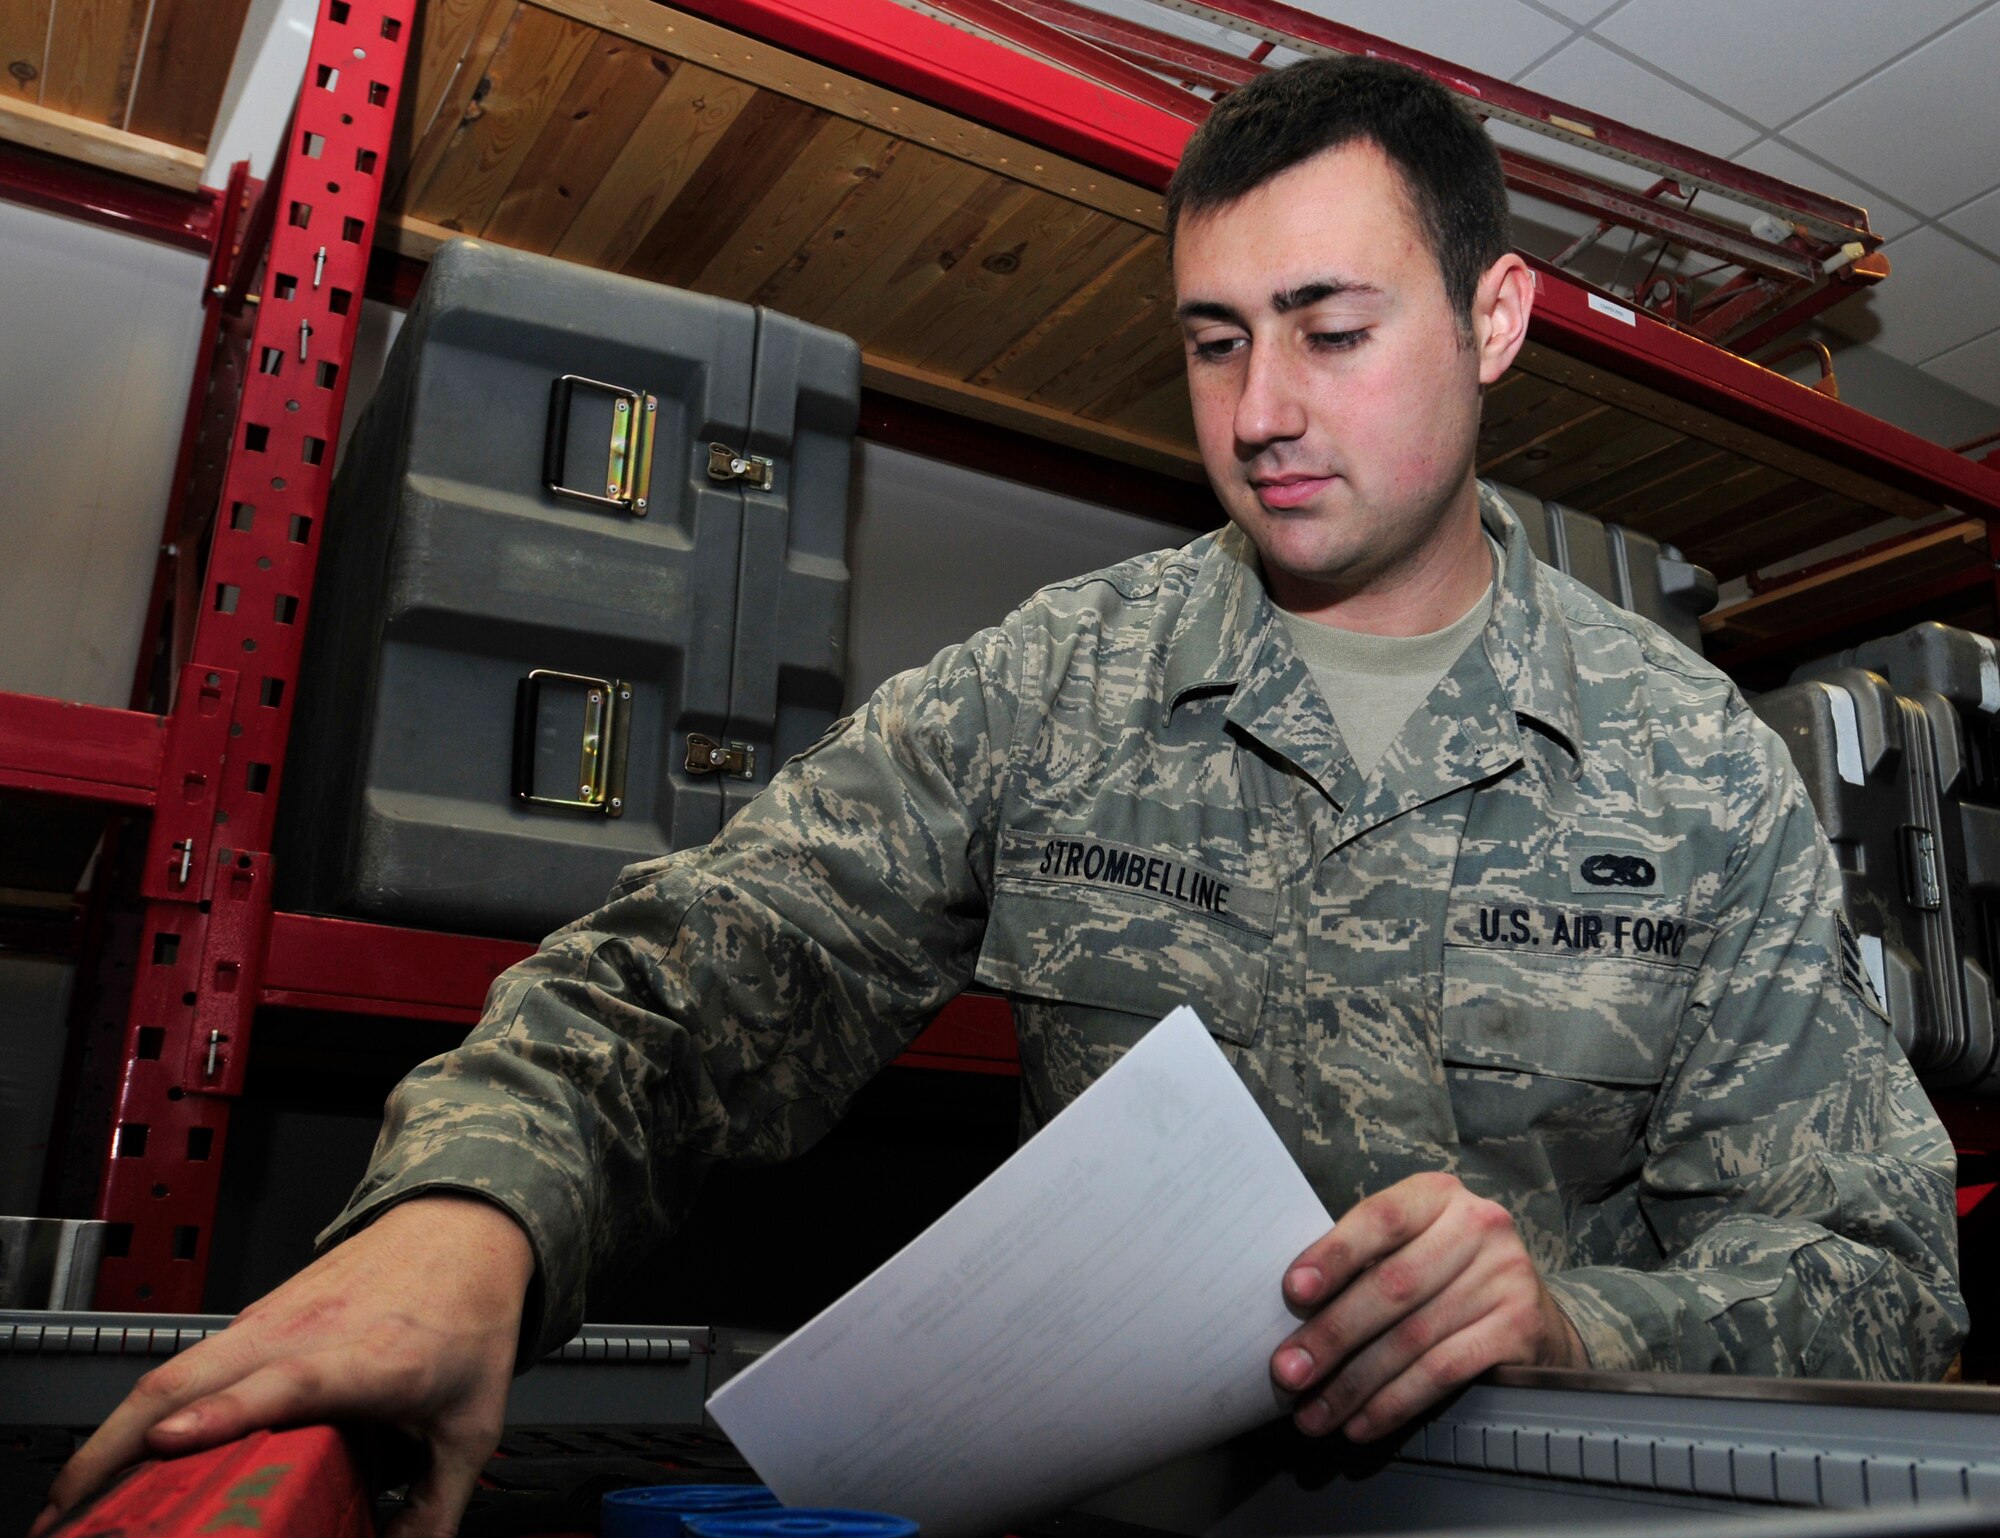 ROYAL AIR FORCE LAKENHEATH, England – Senior Airman Michael Strombelline, 48th Aircraft Maintenance Squadron support technician, inspects a tool box in the Support Section at the Strike Eagle Complex, Dec. 1, 2011. Strombelline contributed to the accomplishments which helped lead to Capt. William Bernecker, former 48th AMXS Officer in Charge, being awarded the Gen. Lew Allen Jr. Trophy. (U.S. Air Force photo by Senior Airman Tiffany M. Deuel)